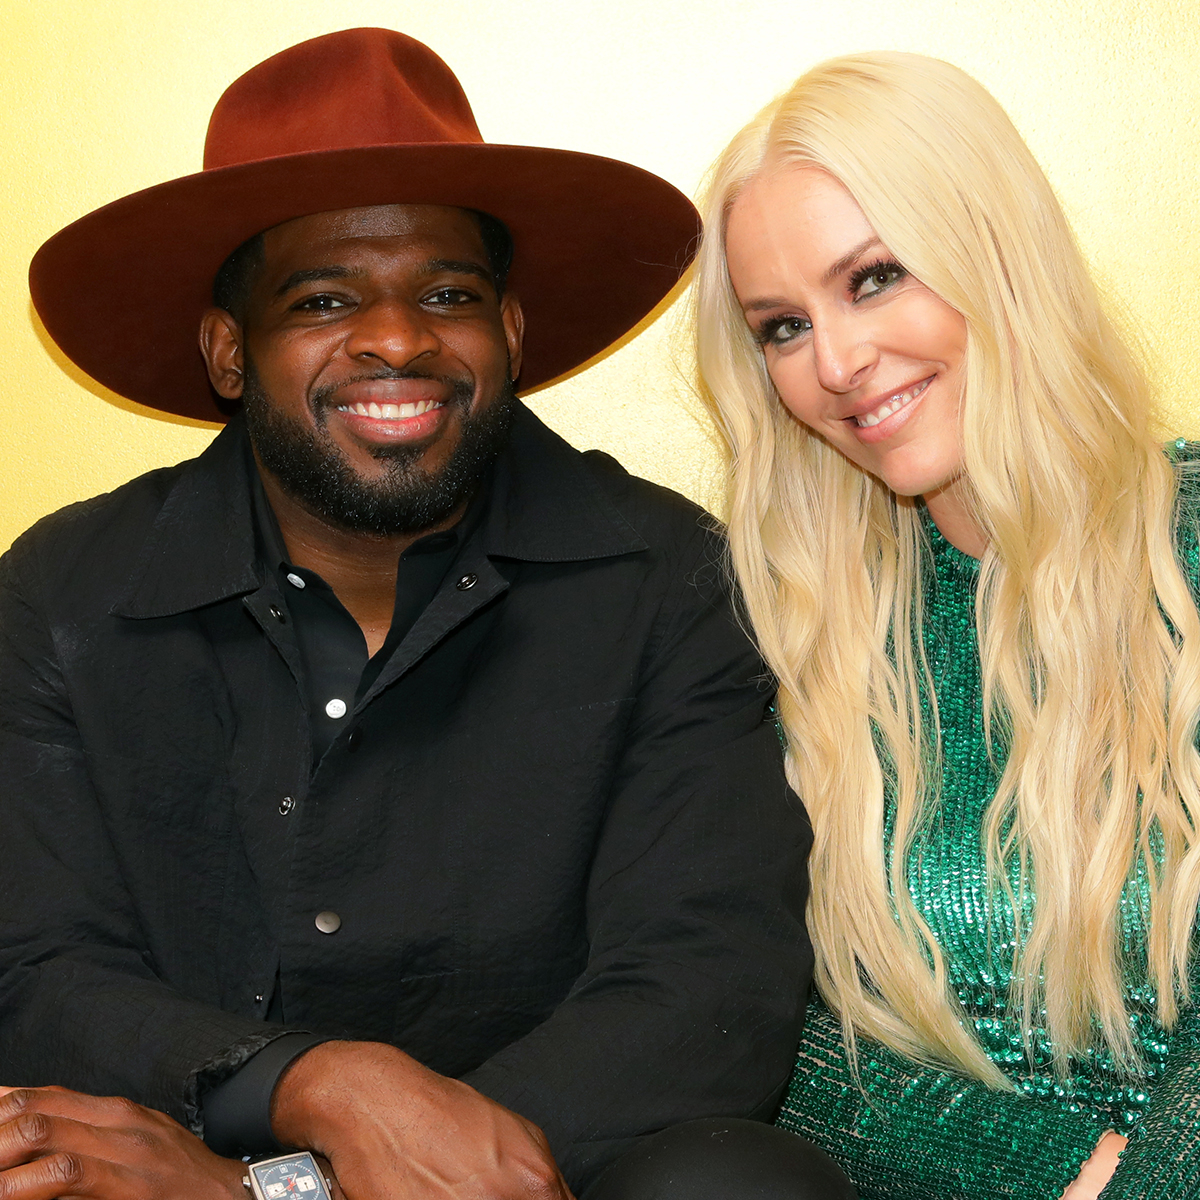 Lindsey Vonn and PK Subban split up after 3 years together